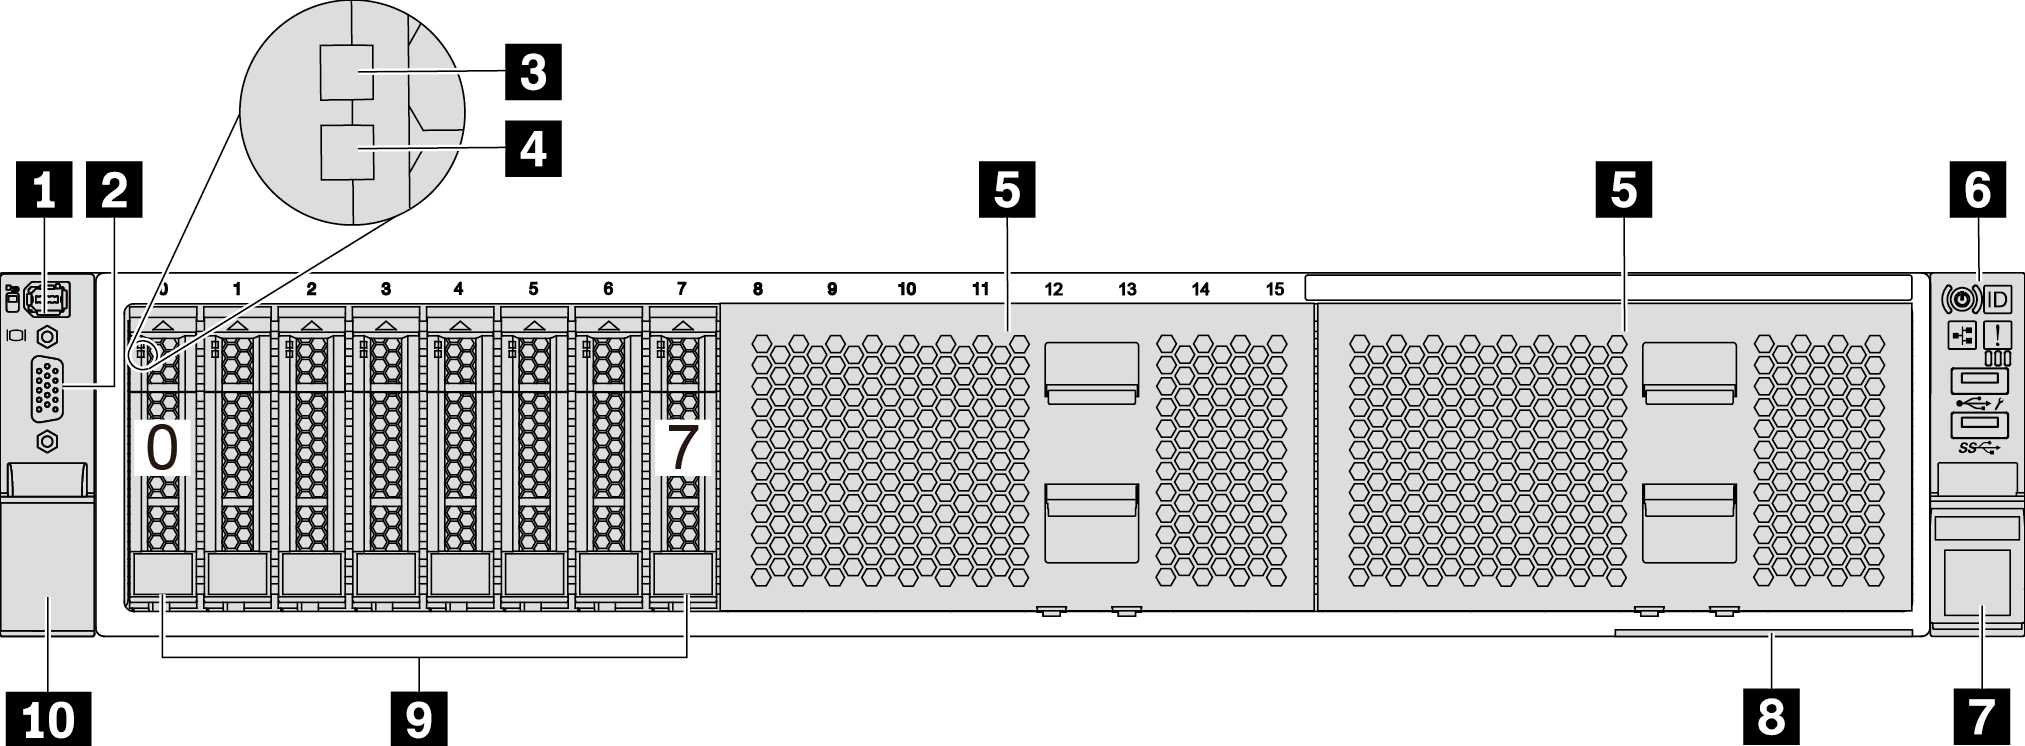 Front view of server models with eight 2.5-inch front drive bays